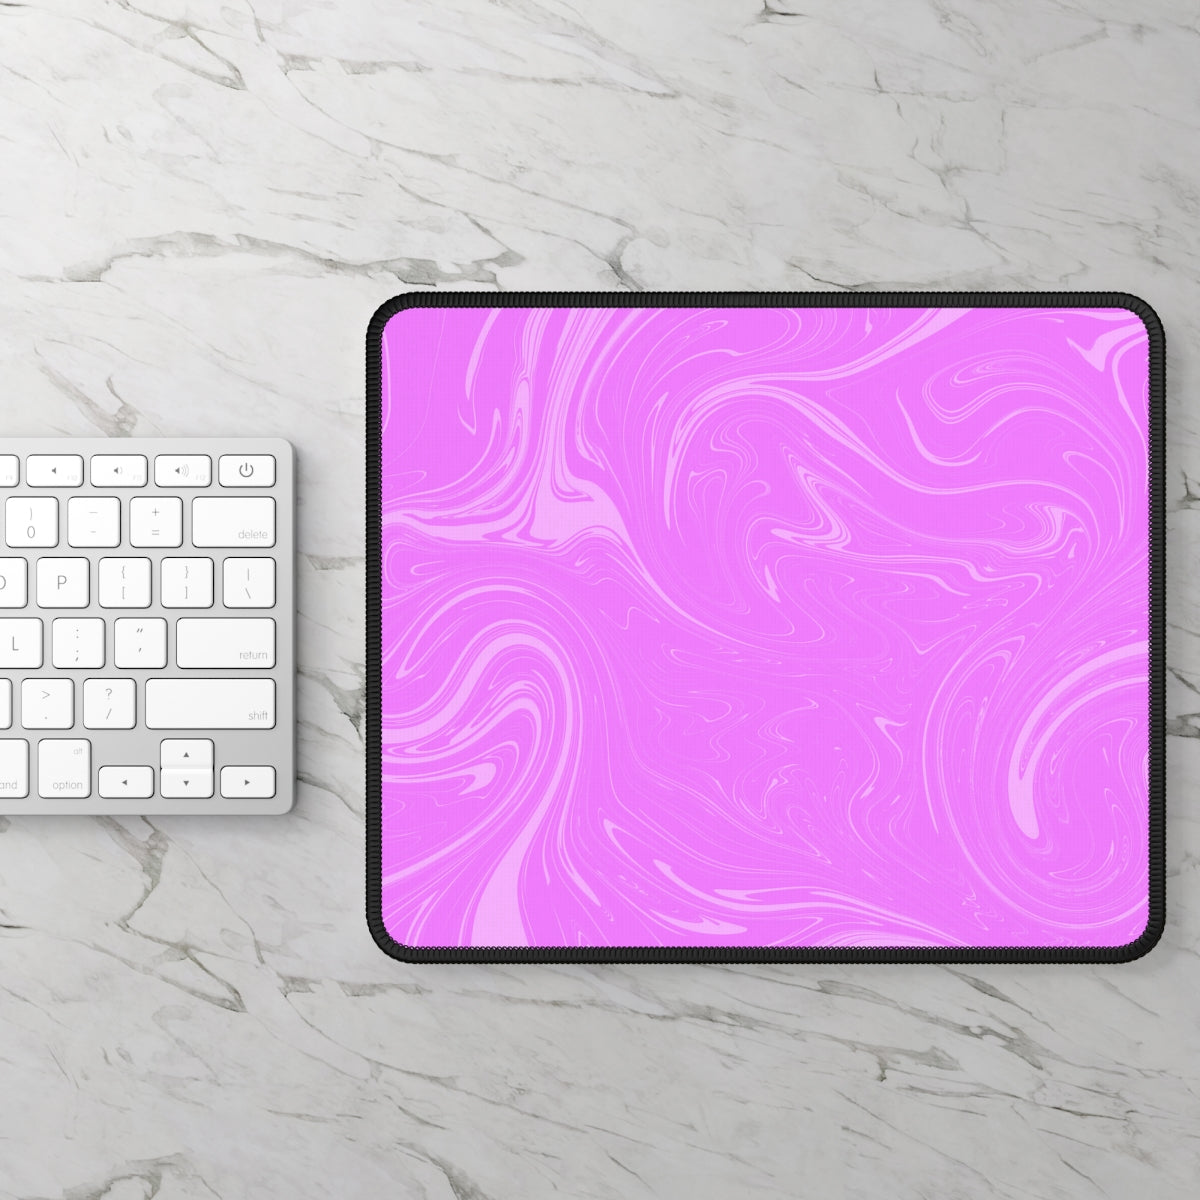 Pink Swirl Gaming Mouse Pad - Desk Cookies